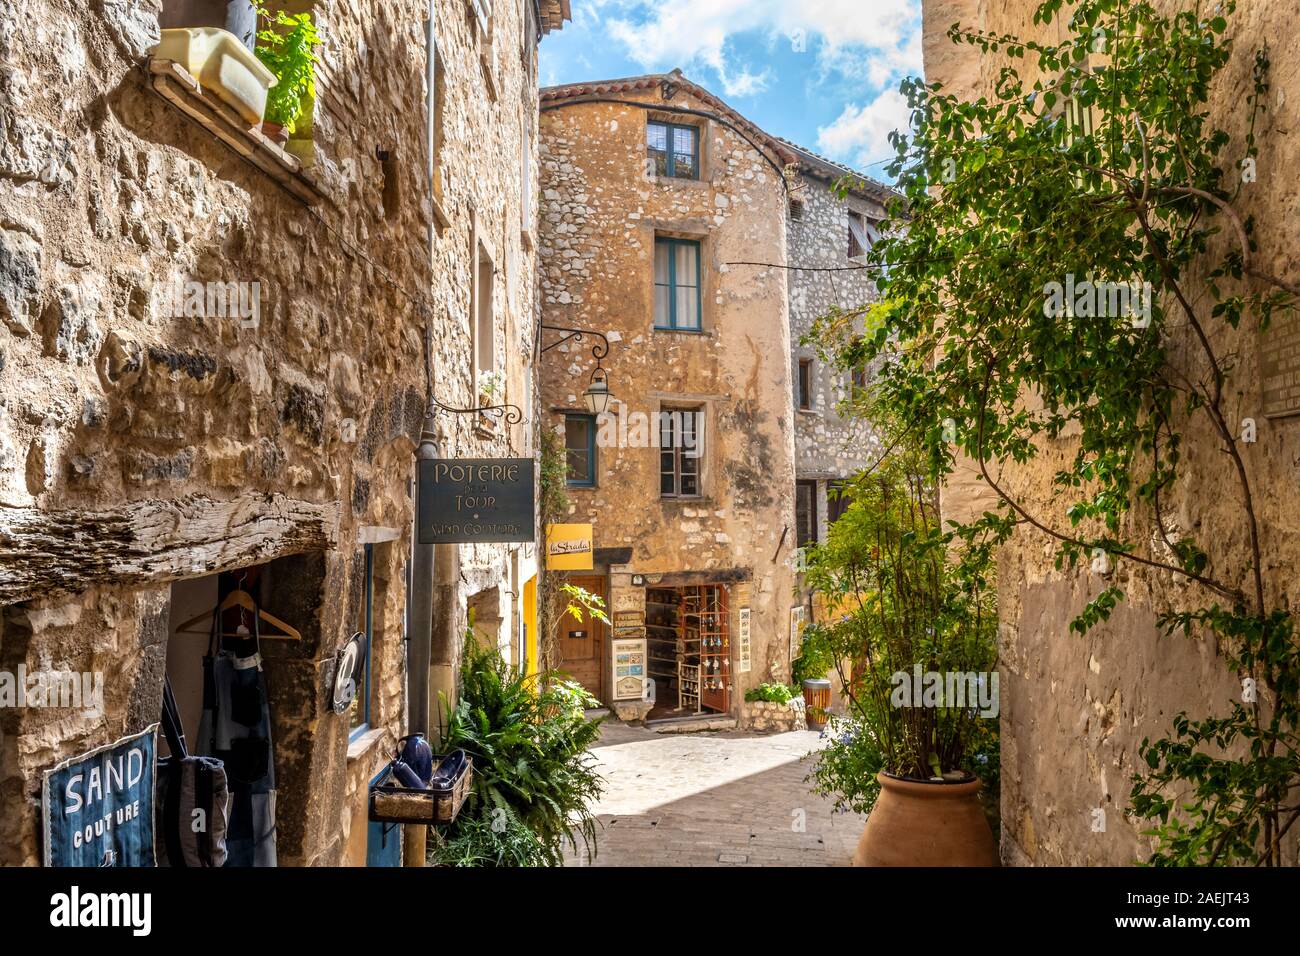 Small shops on an ancient street inside the medieval walled stone village of Tourrettes Sur Loup in the Provence Alpes Maritimes area of South France. Stock Photo